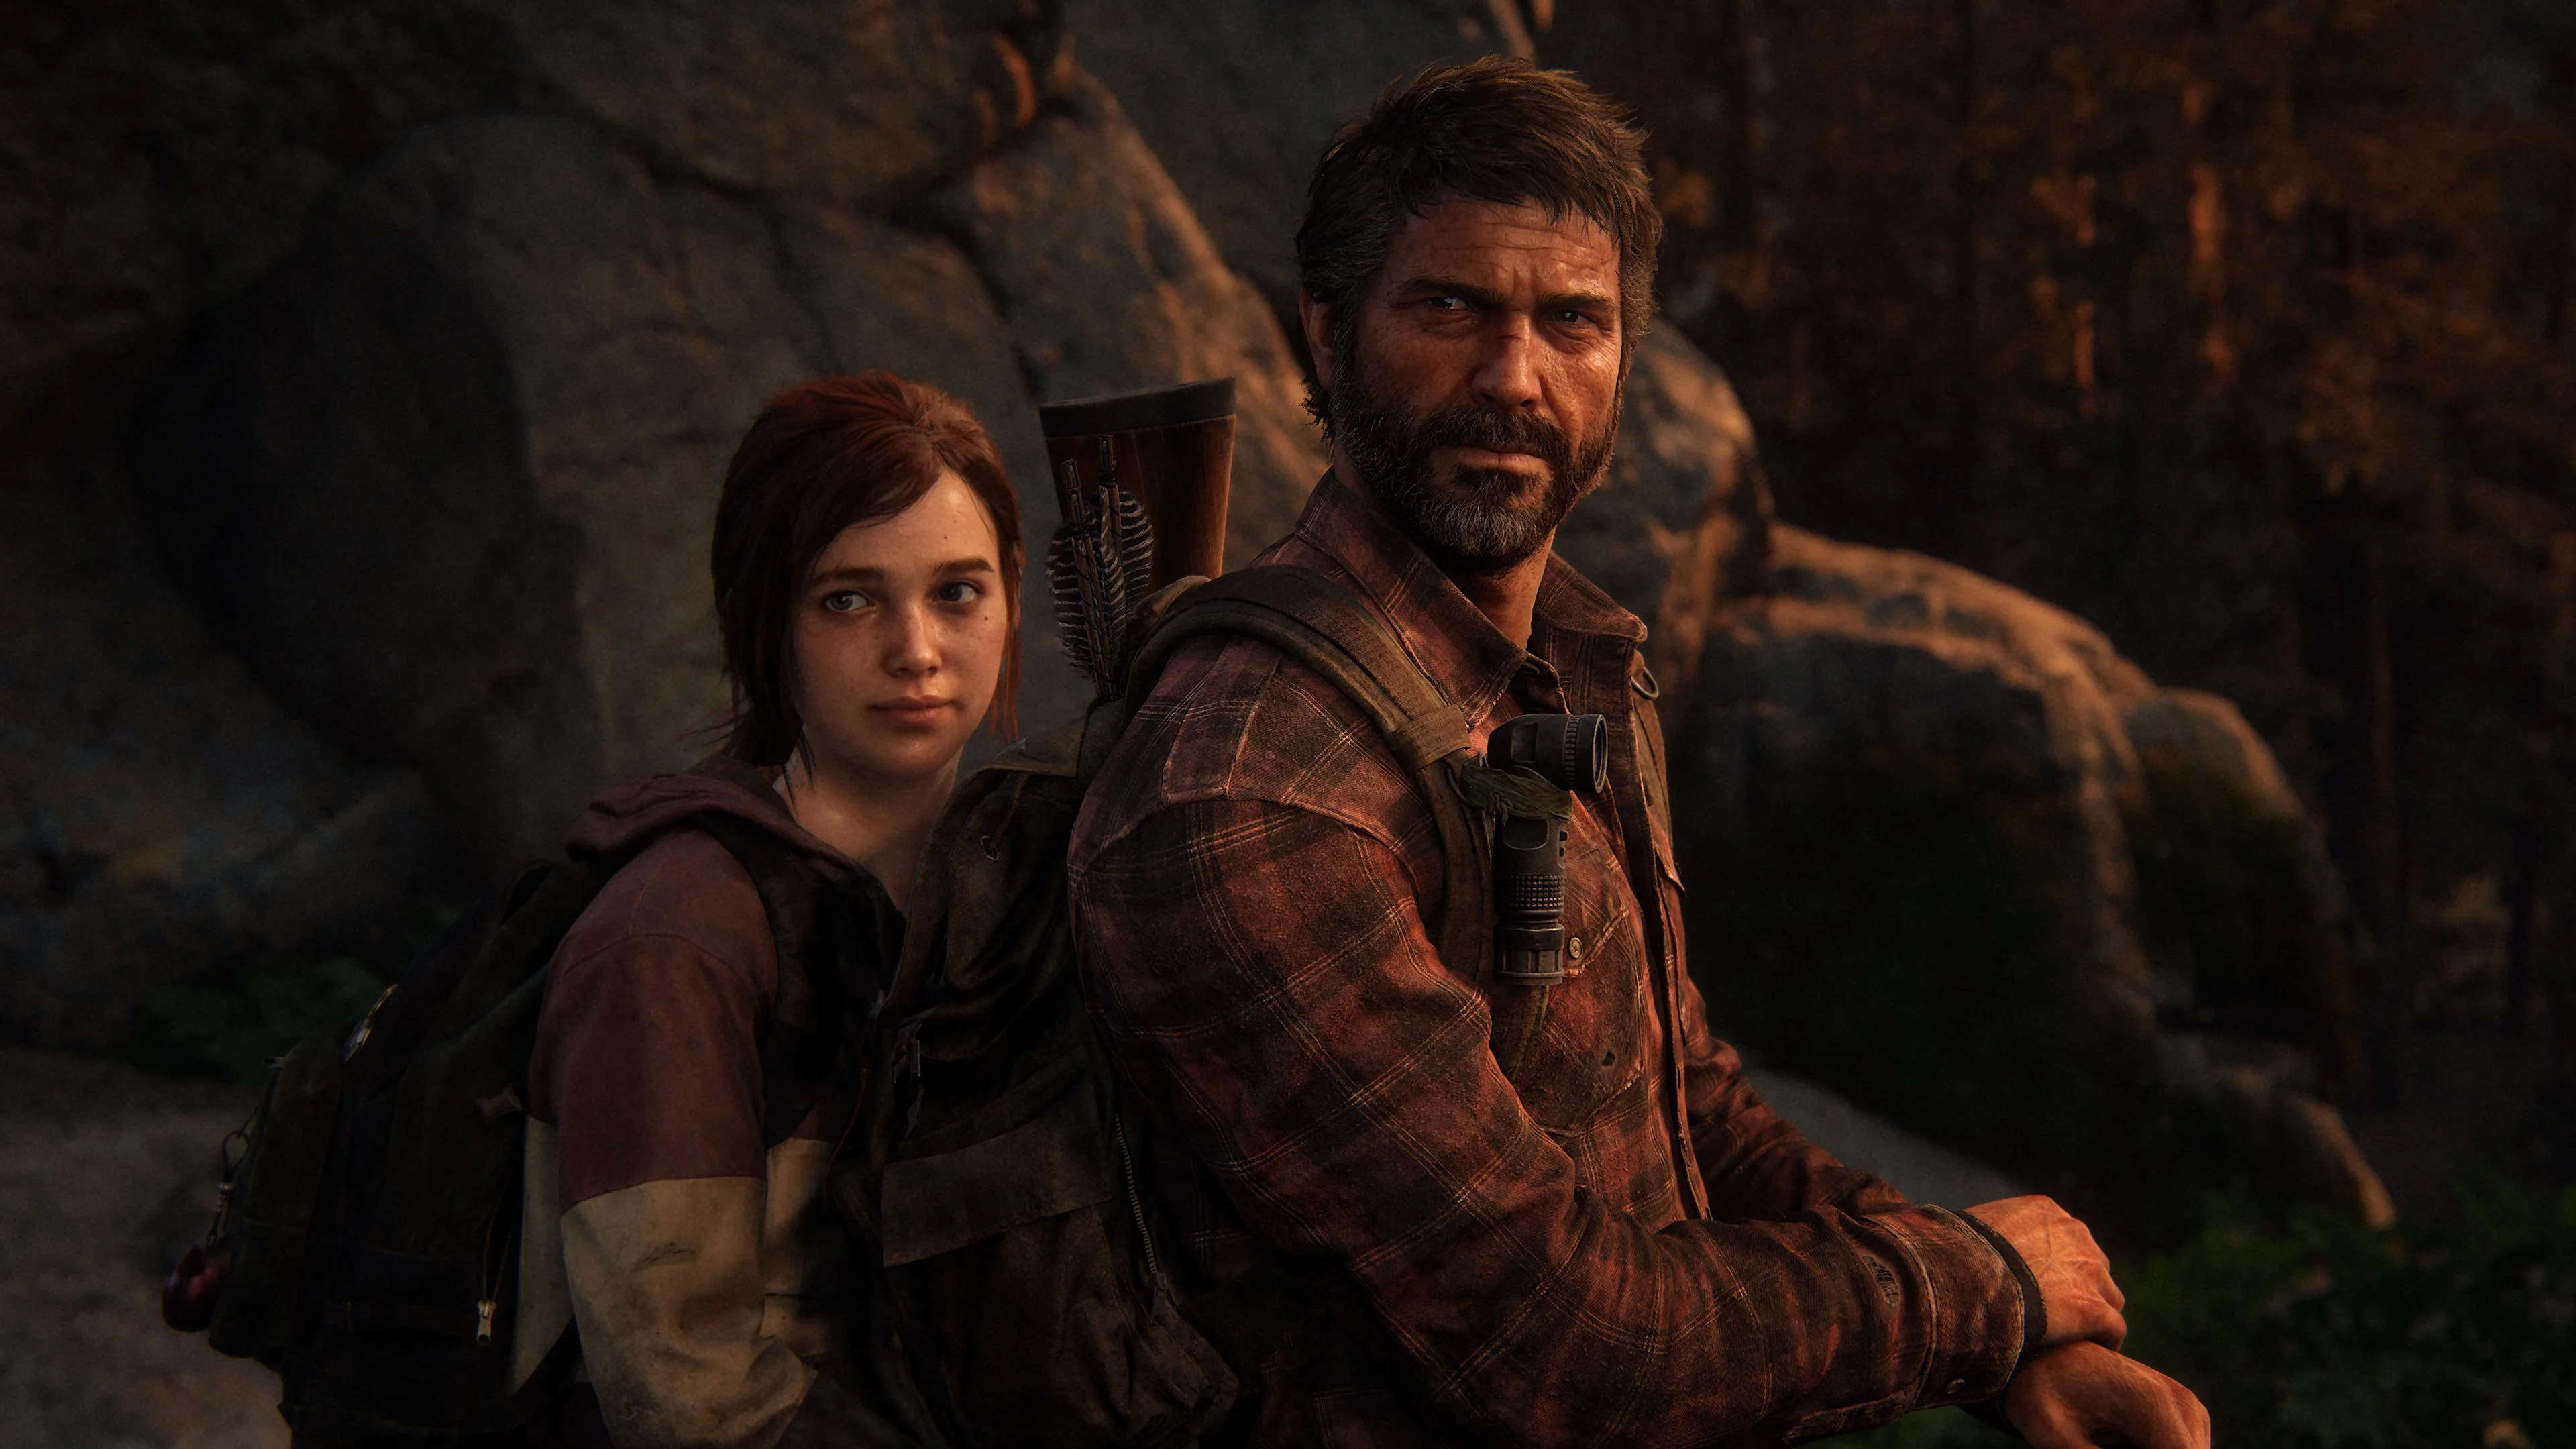 The Last of Us Part II: Here’s what happens with Ellie and Abby in the climax 